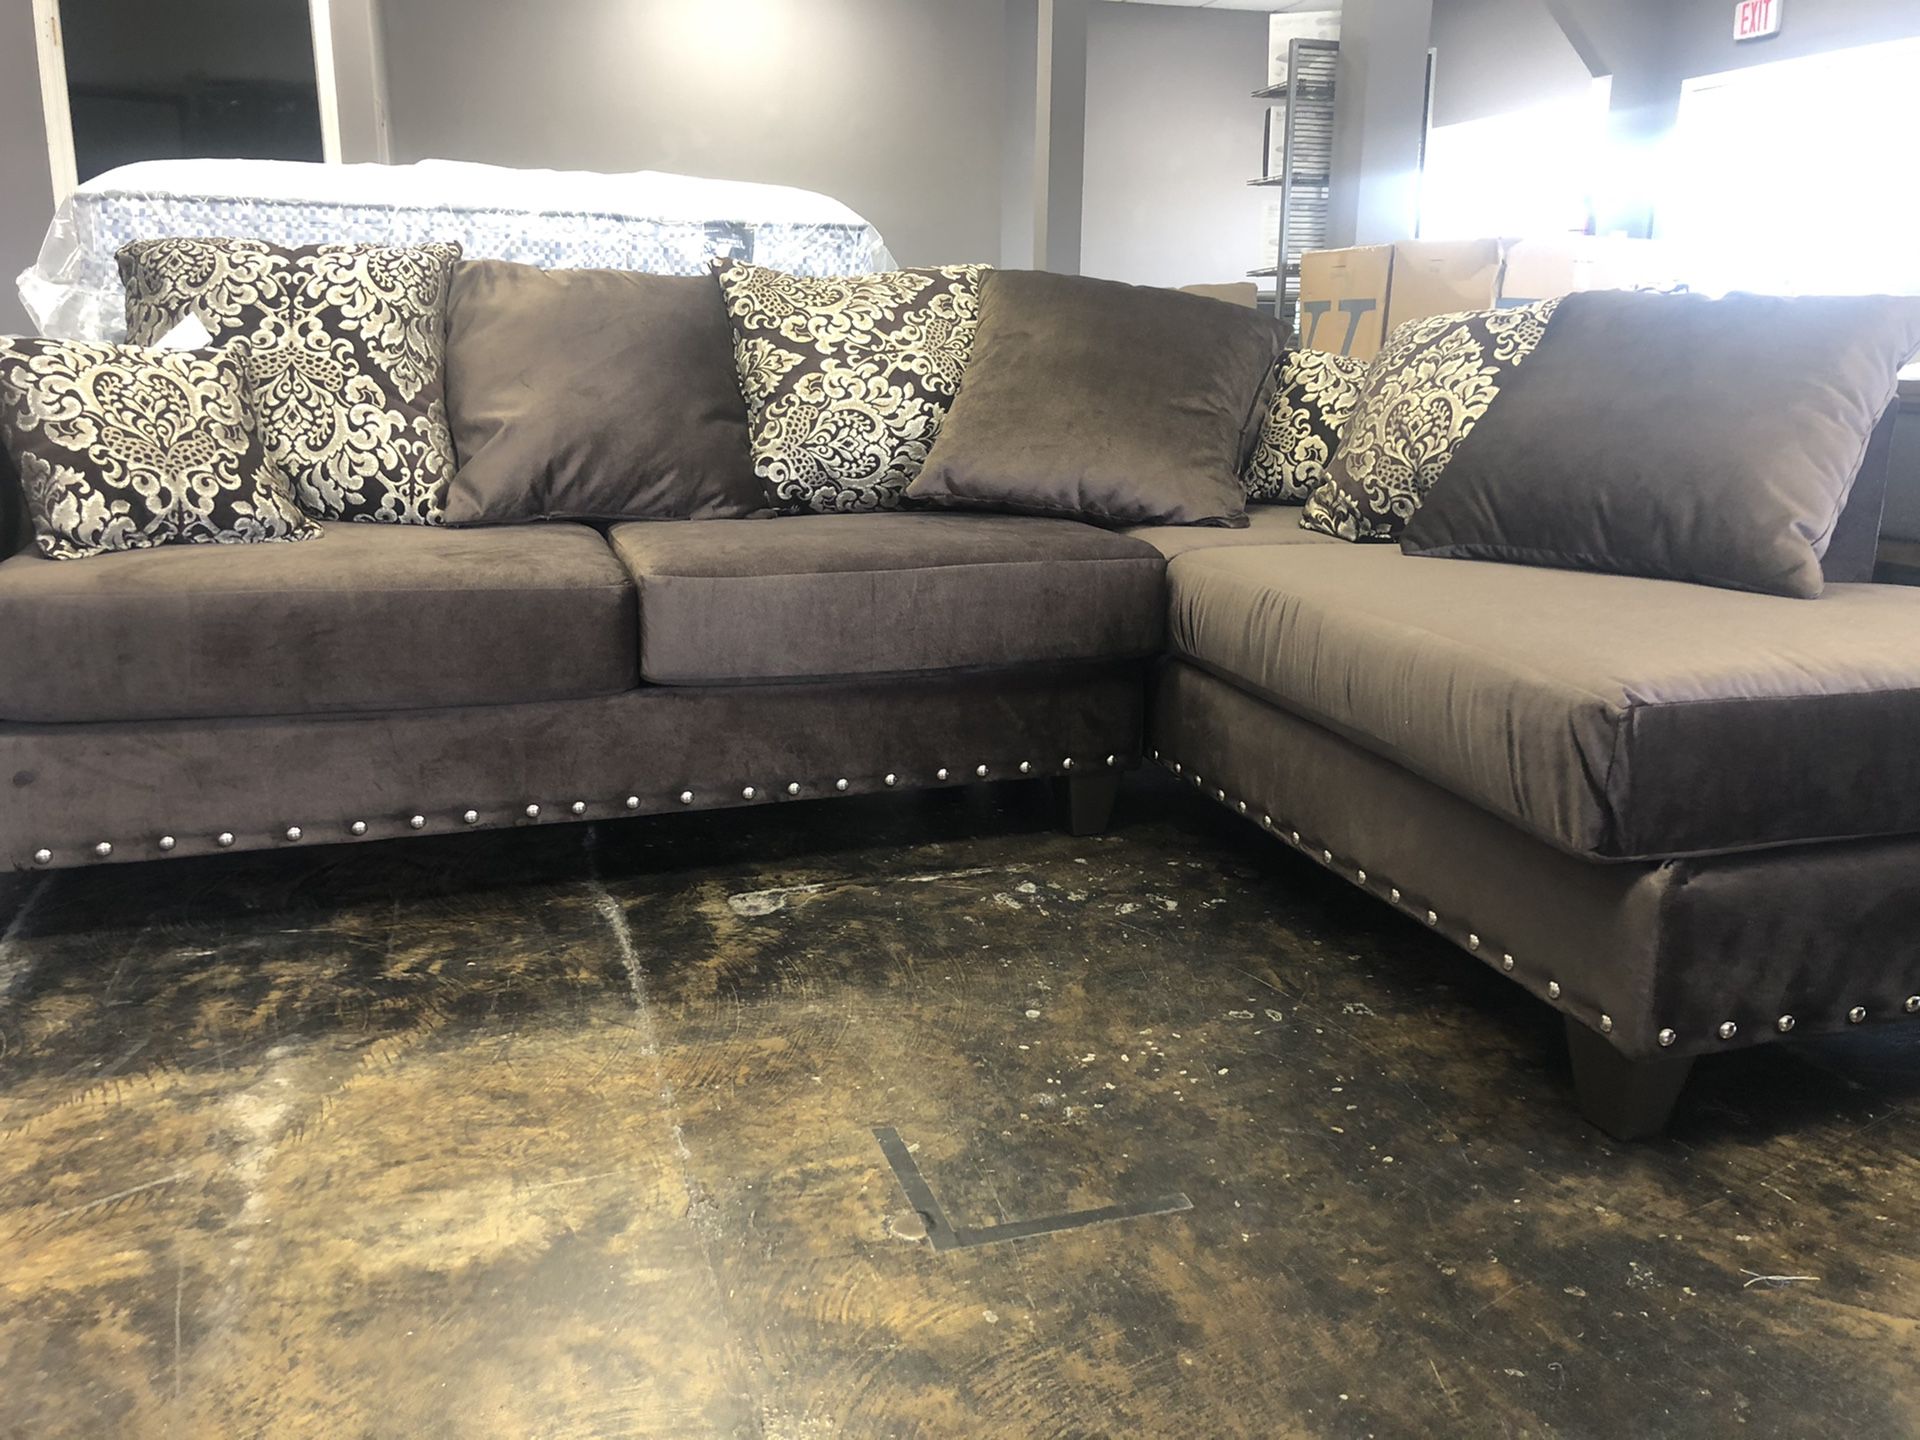 Sofa Chaise $40 And 100 Days to pay in full